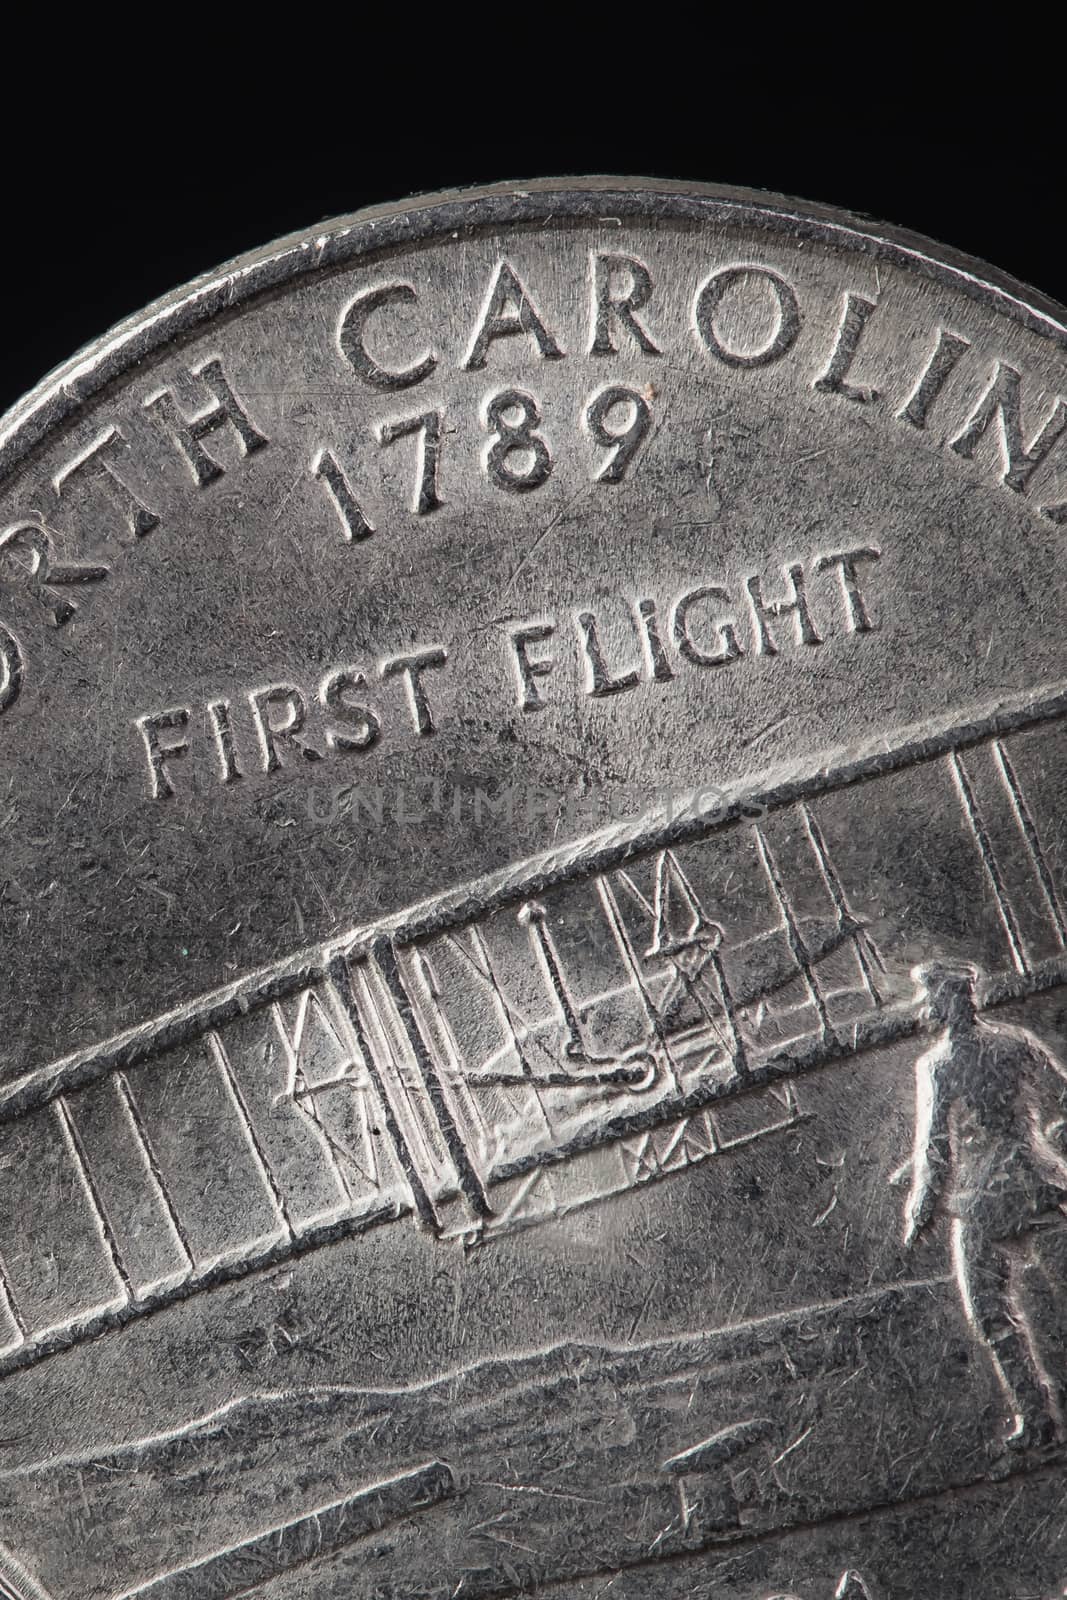 US American coin with wording "First Flight" on black background by FrameAngel